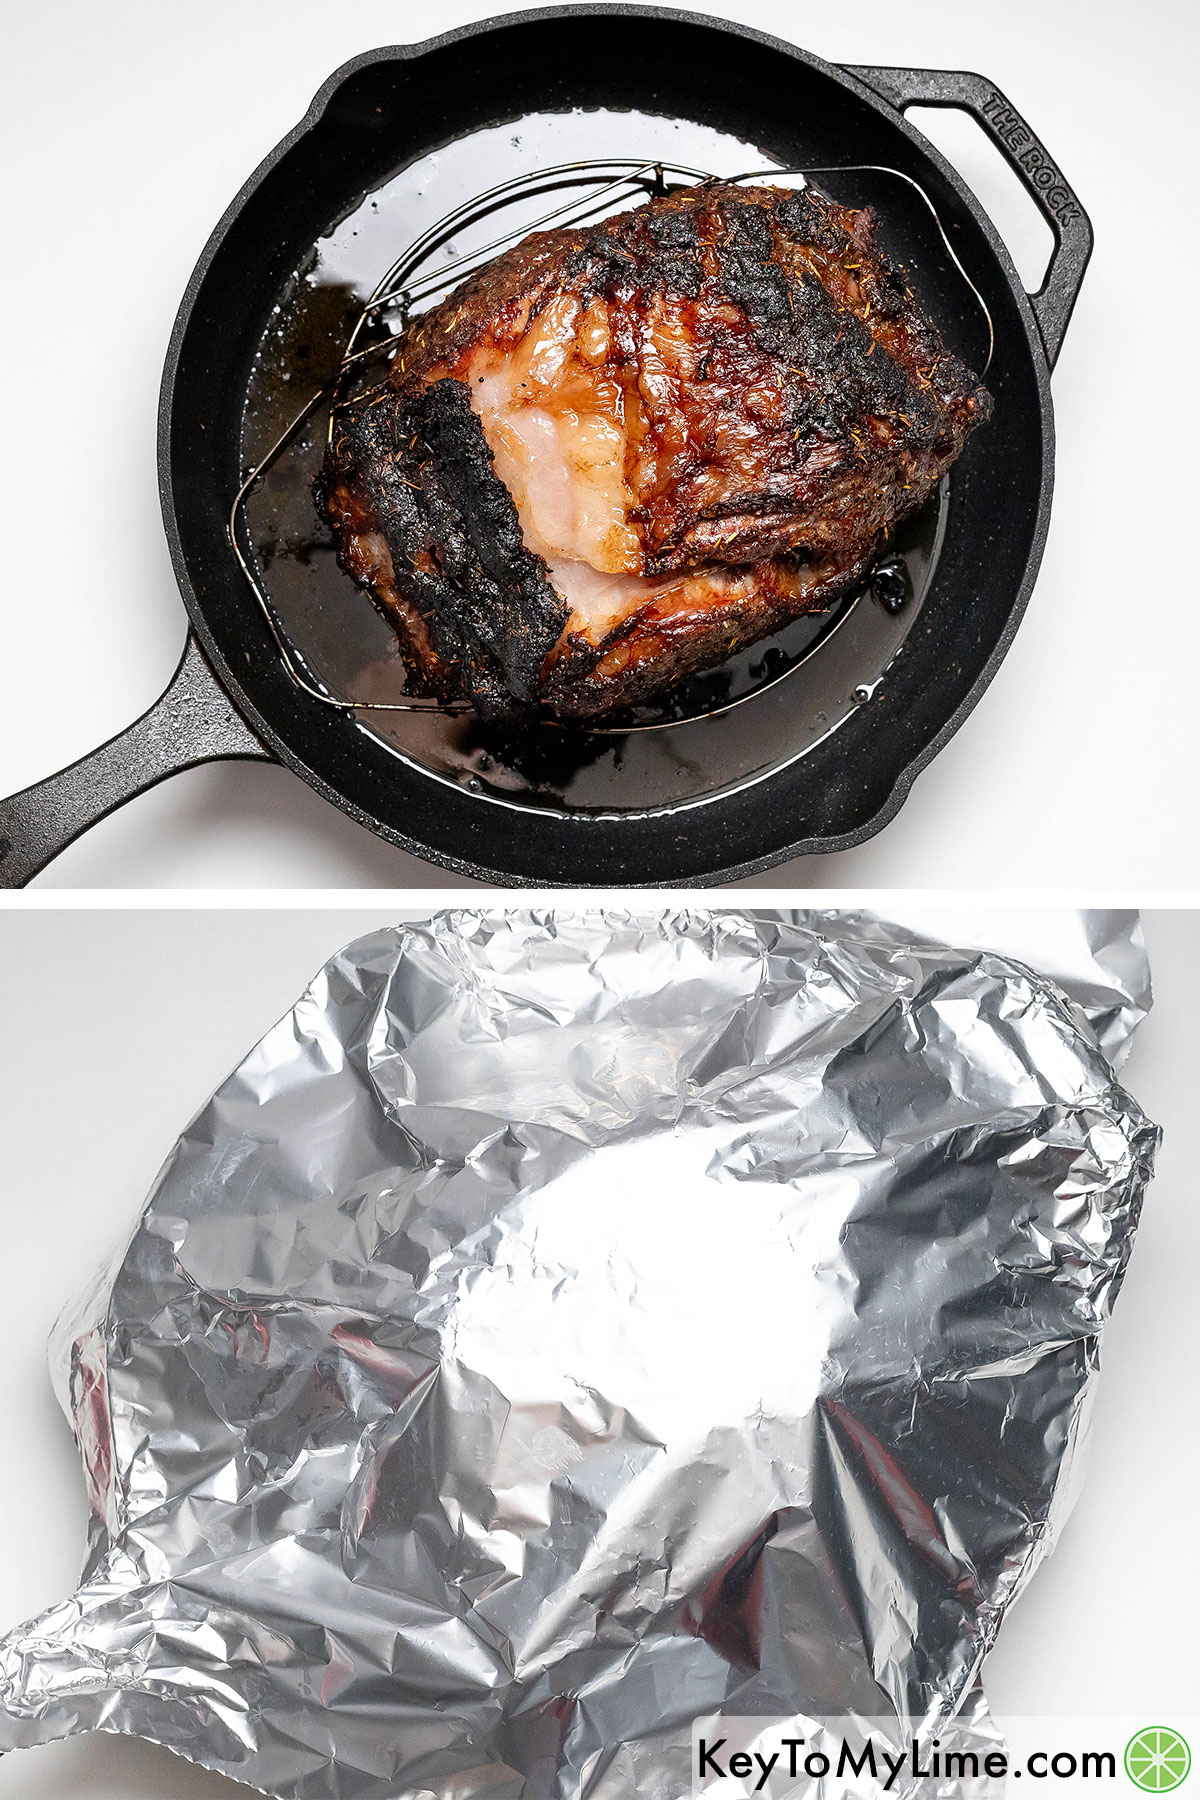 Removing the roast from the oven, and then covering with aluminum foil and resting for twenty minutes.